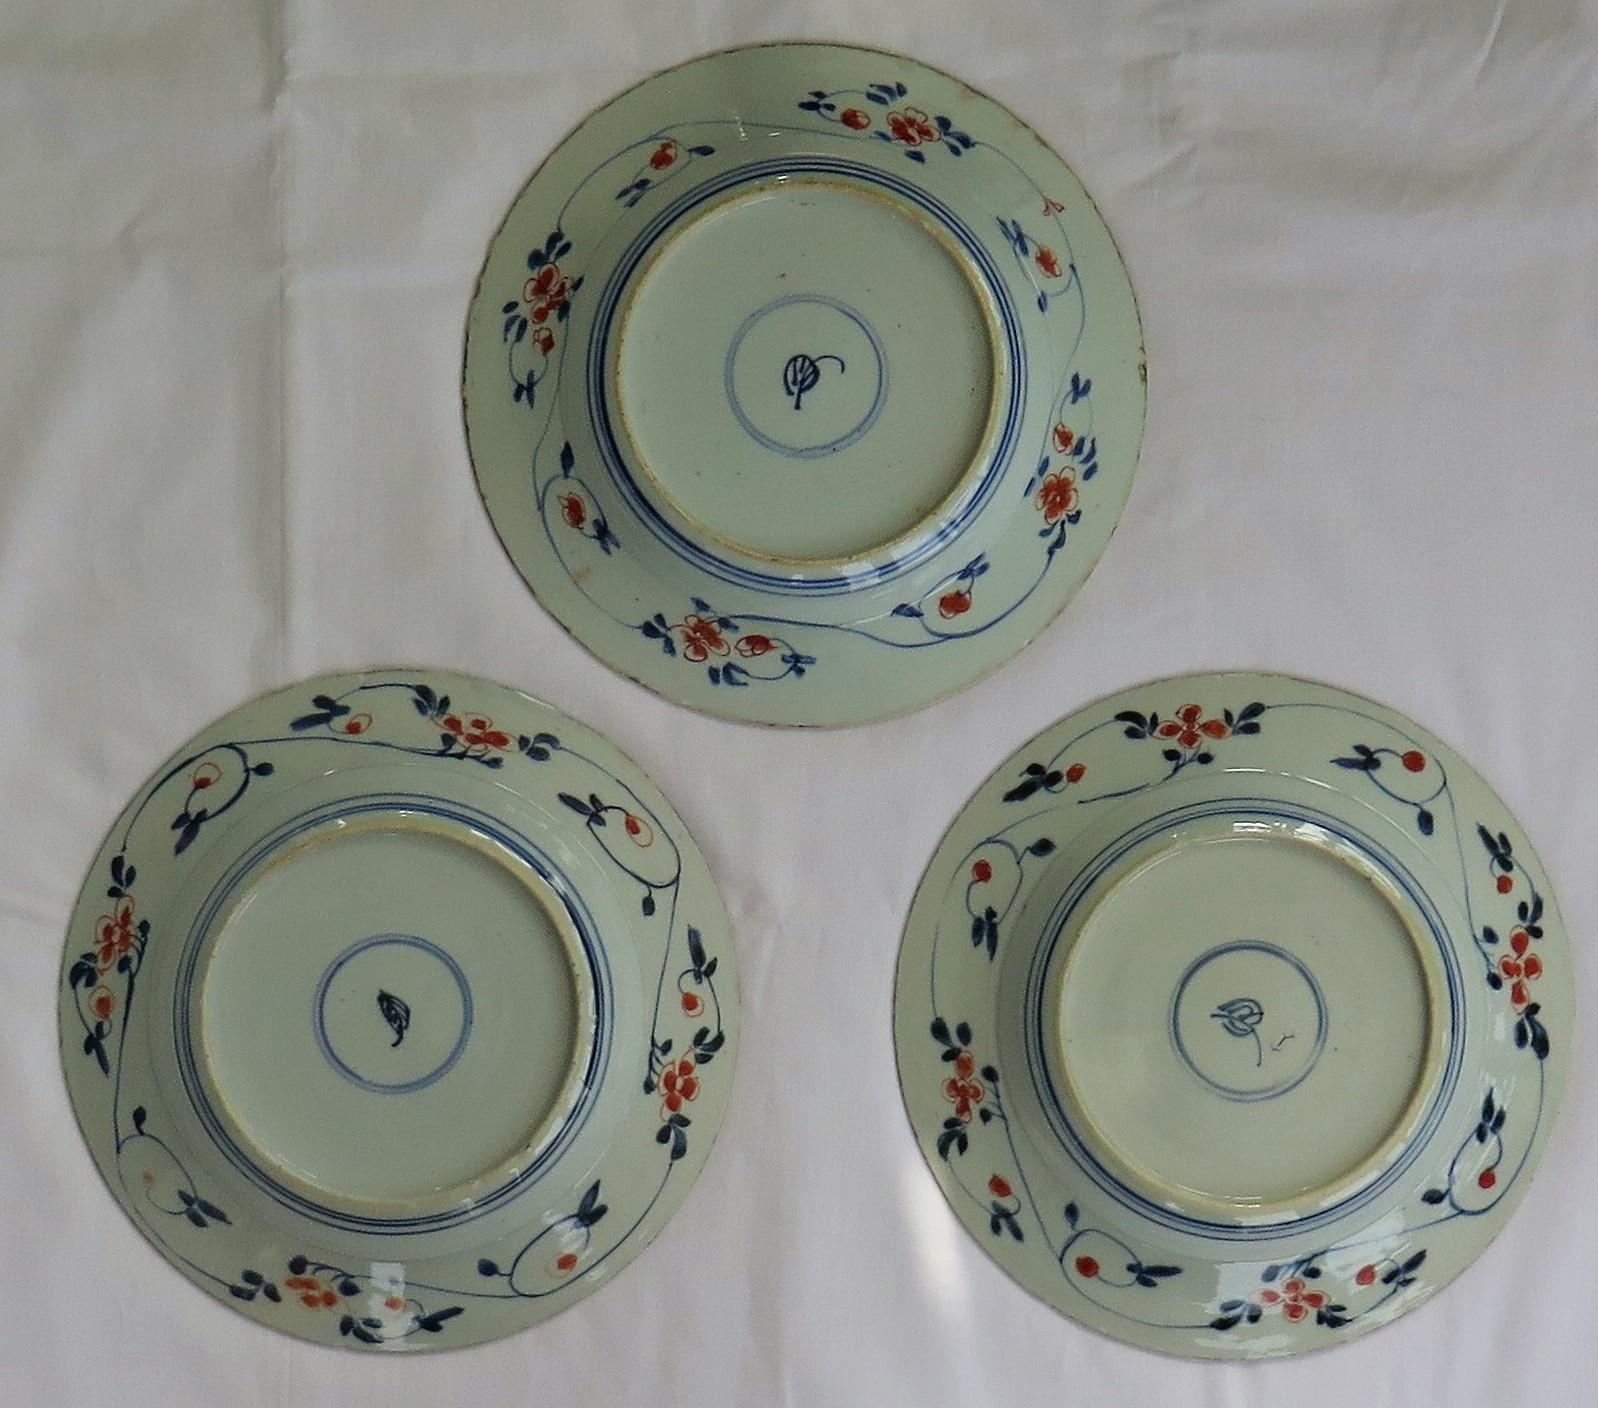 These are a set of three beautifully hand painted Chinese Export porcelain Plates or Dishes from the Qing, Kangxi period, 1662-1722 and are all fully marked to the base with the Kangxi period Artemisia Leaf mark within a double blue ring.

The